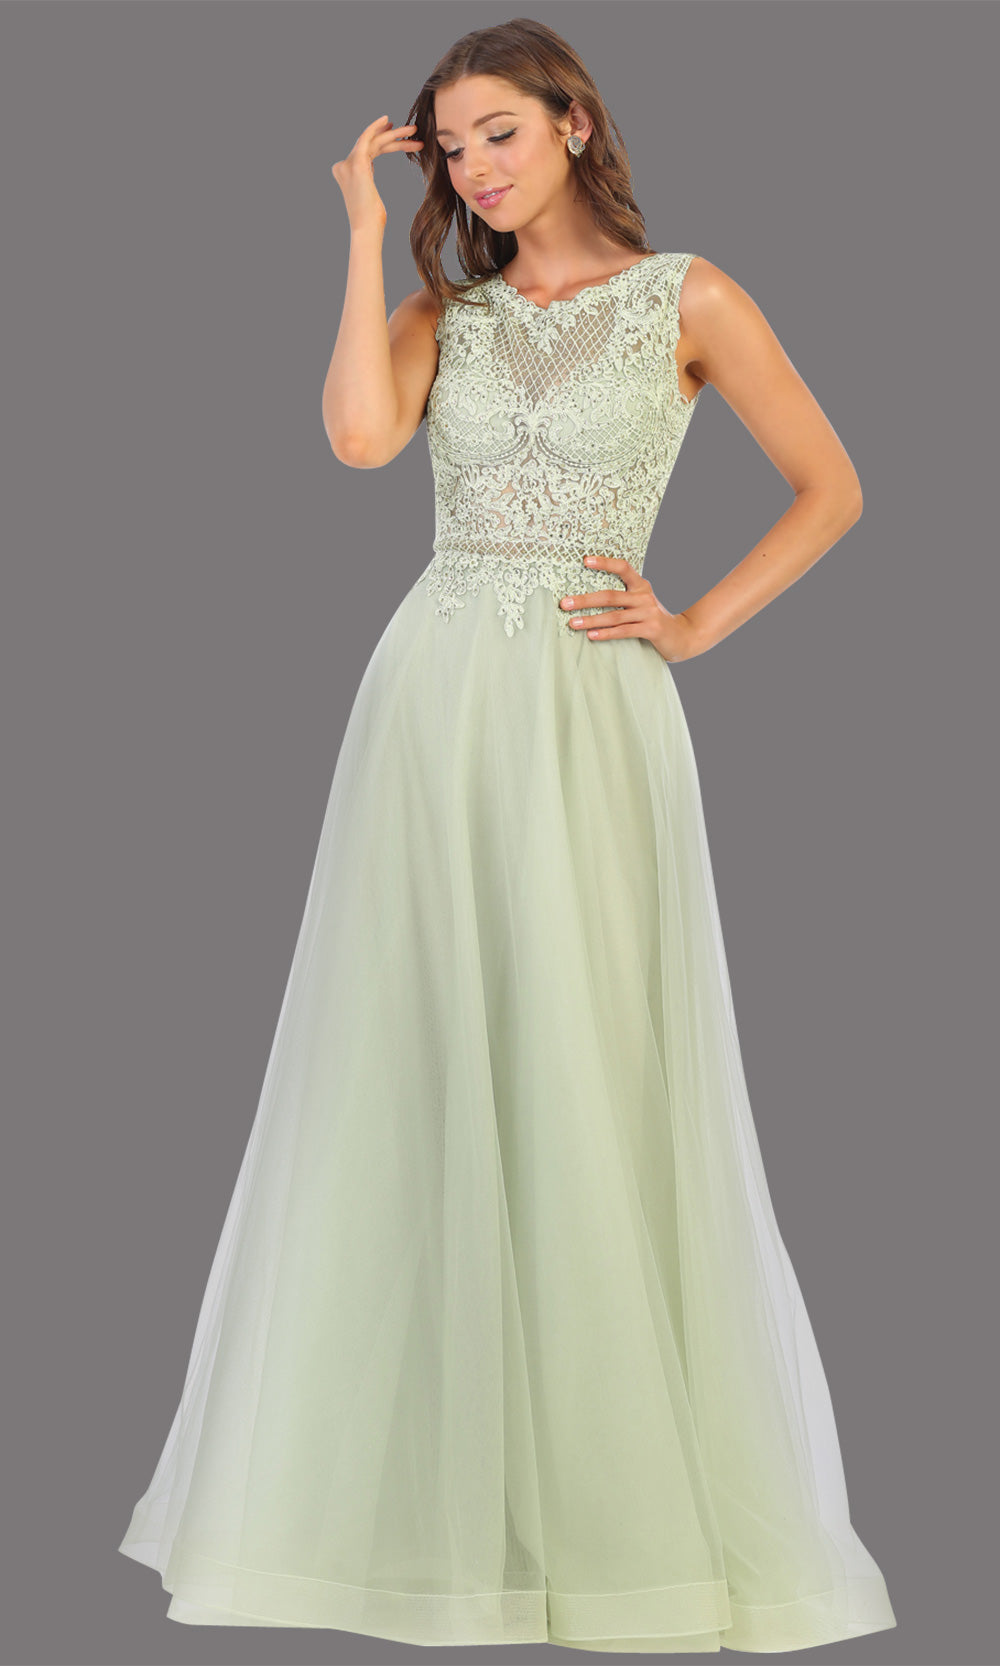 Mayqueen MQ1717 long sage green flowy dress with high neck & high back. This light green dress is perfect for bridesmaid dresses, simple wedding guest dress, prom dress, gala, black tie wedding. Plus sizes are available, evening party dress.jpg